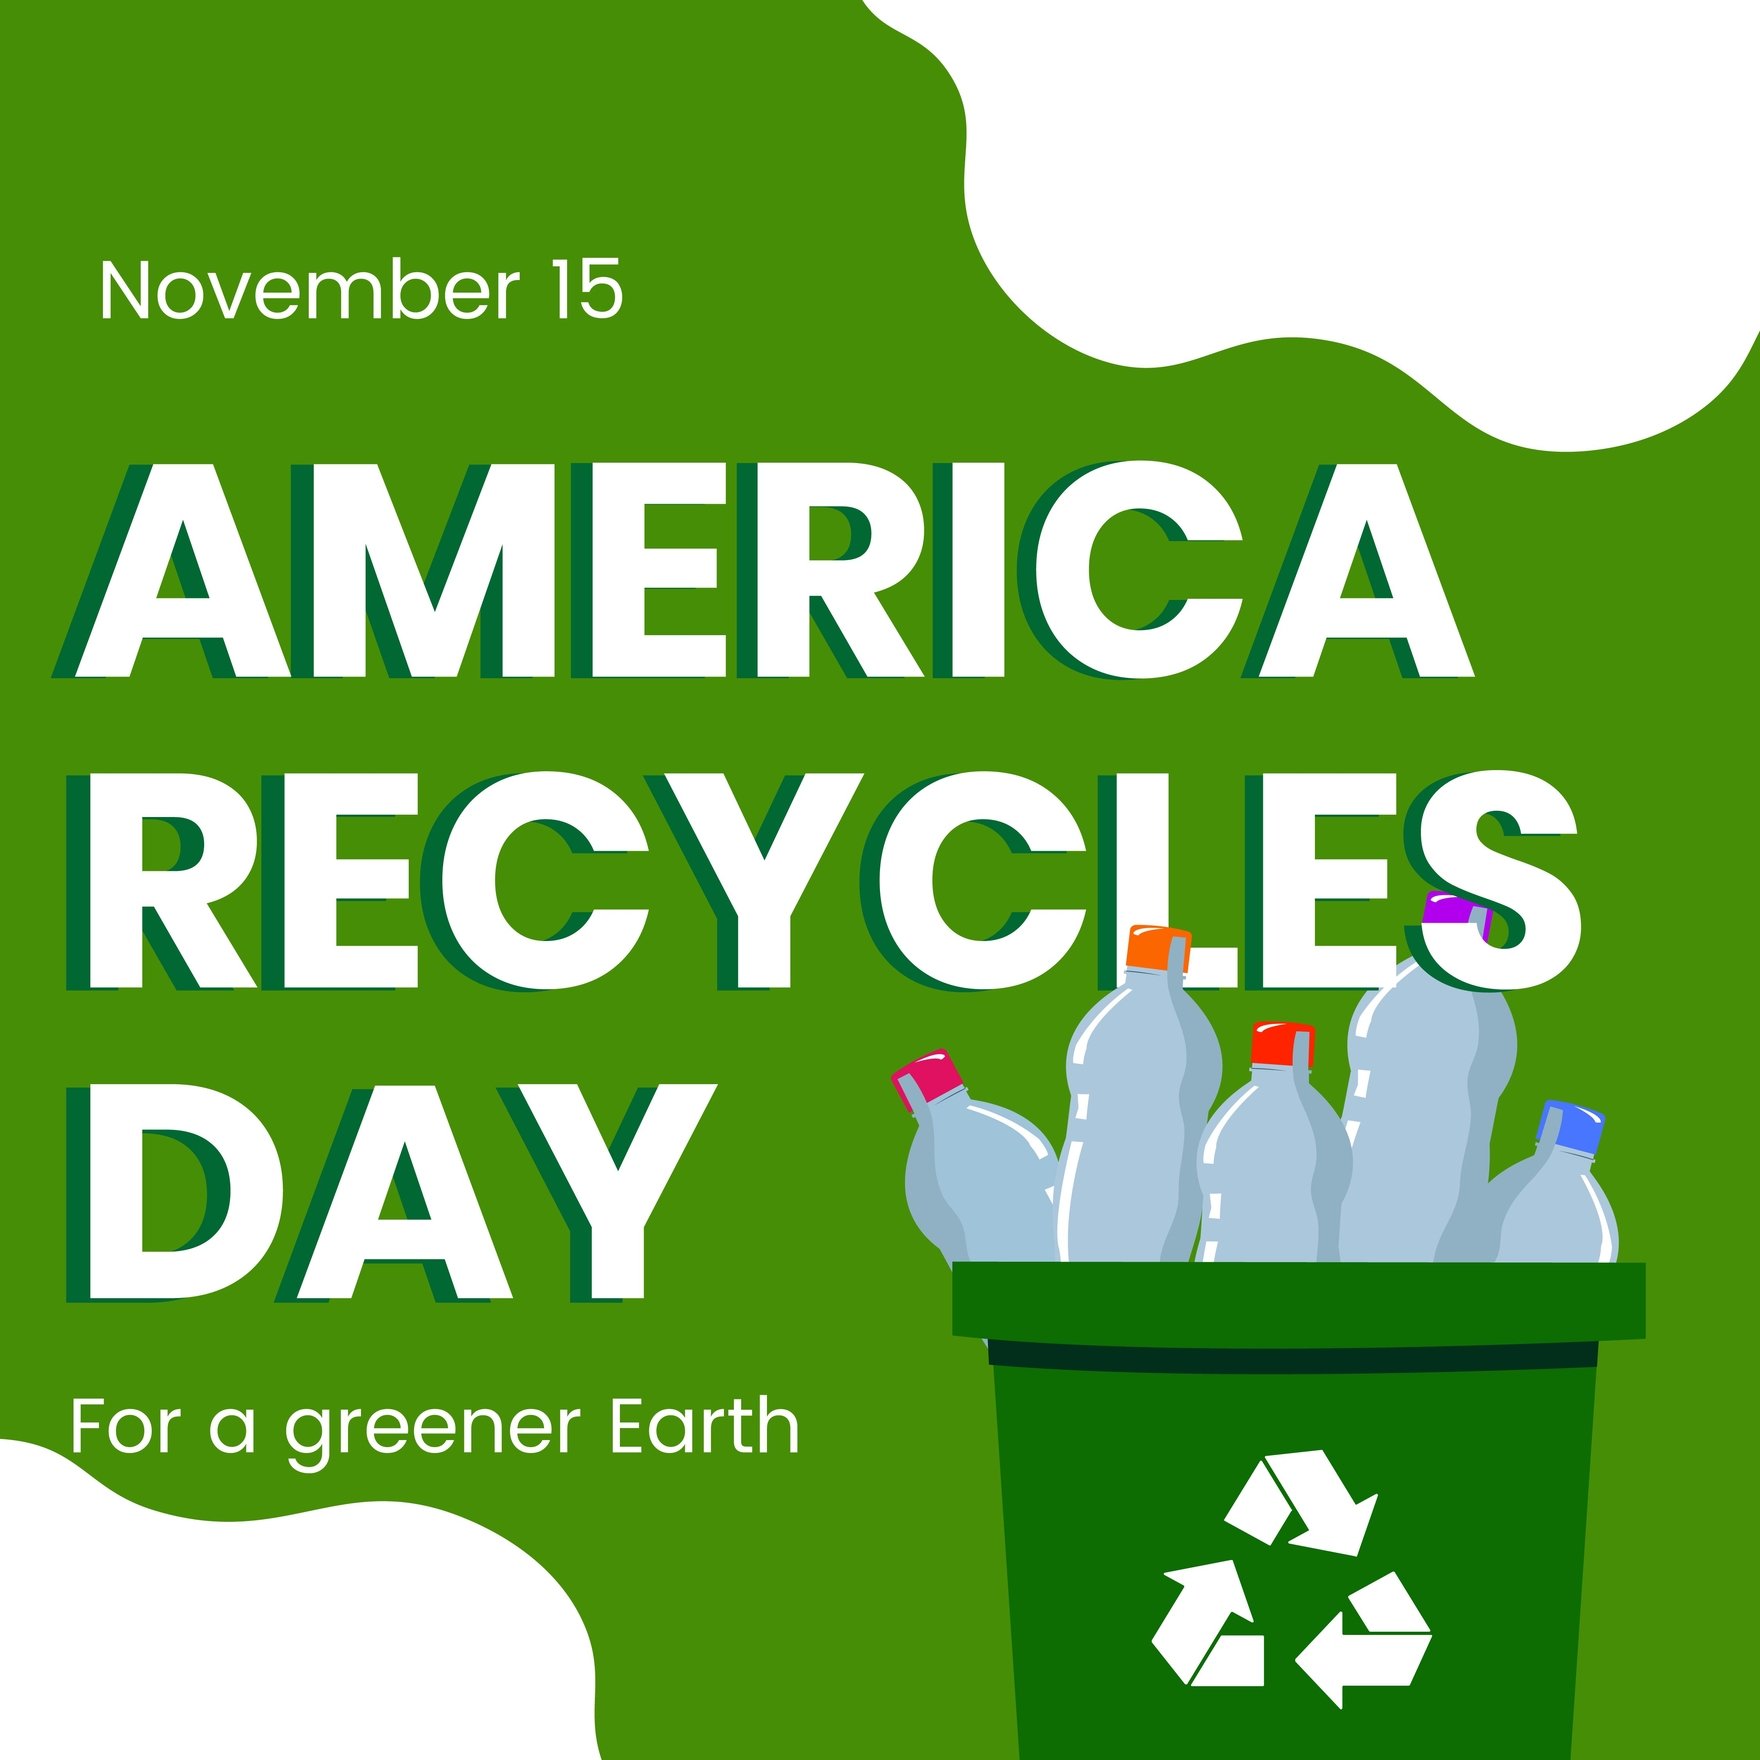 America Recycles Day WhatsApp Post in Illustrator, PSD, EPS, SVG, JPG, PNG